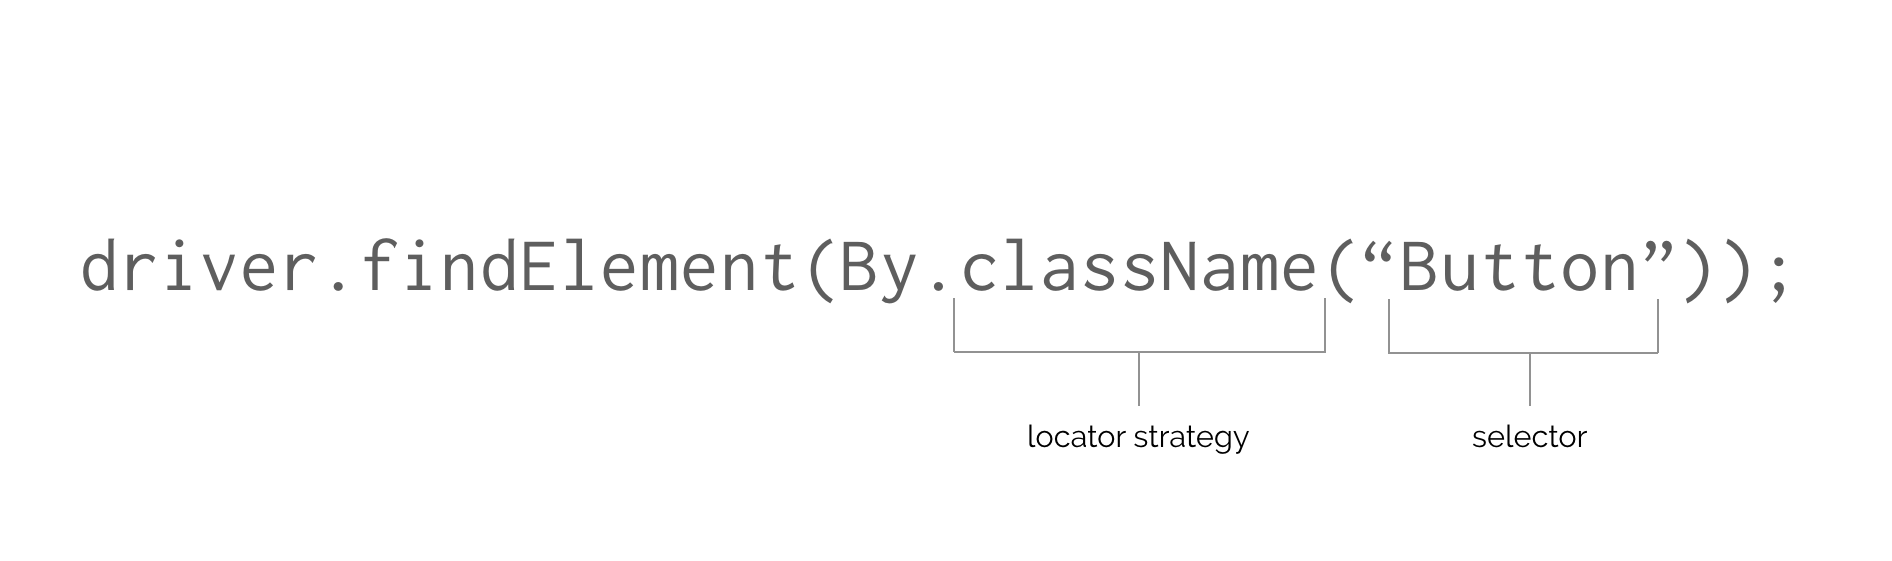 Components of a find element call